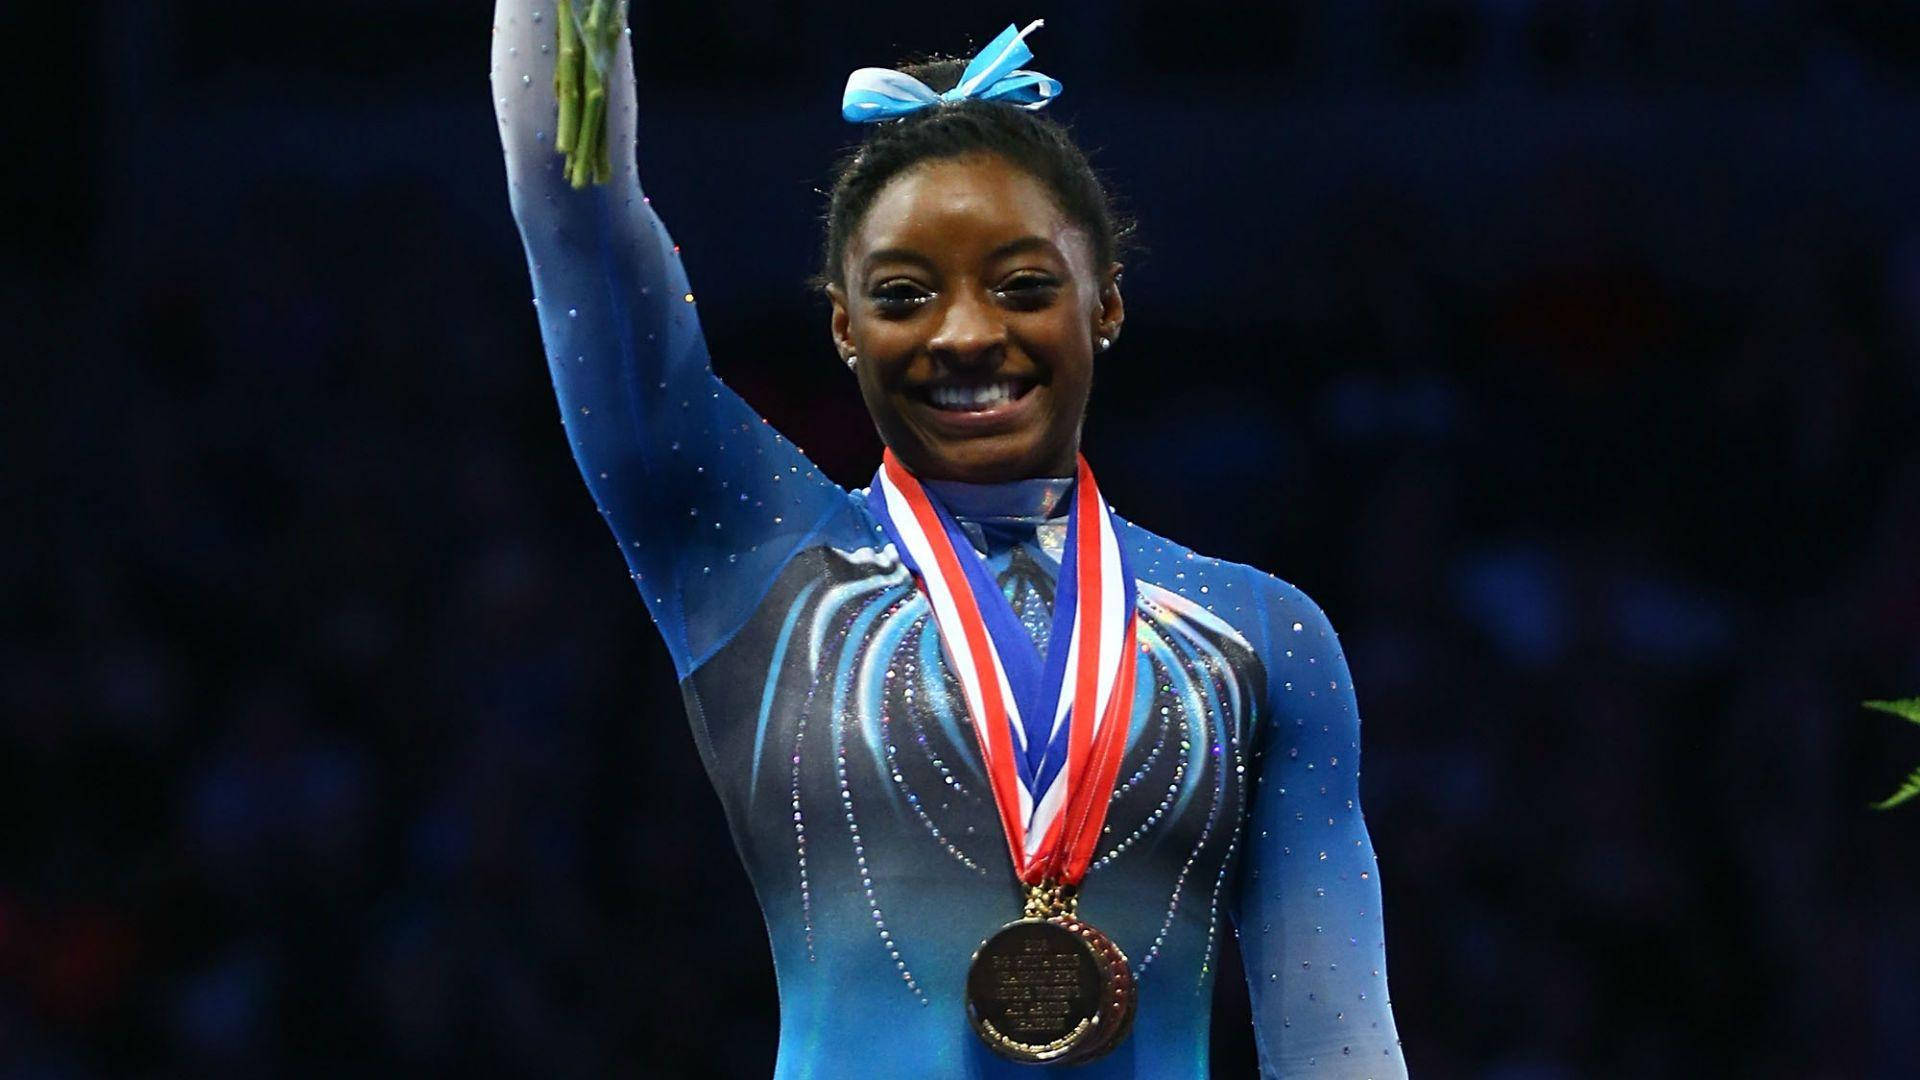 Olympic Gold Medal Gymnast Simone Biles Flawlessly Executing Her Routine Background